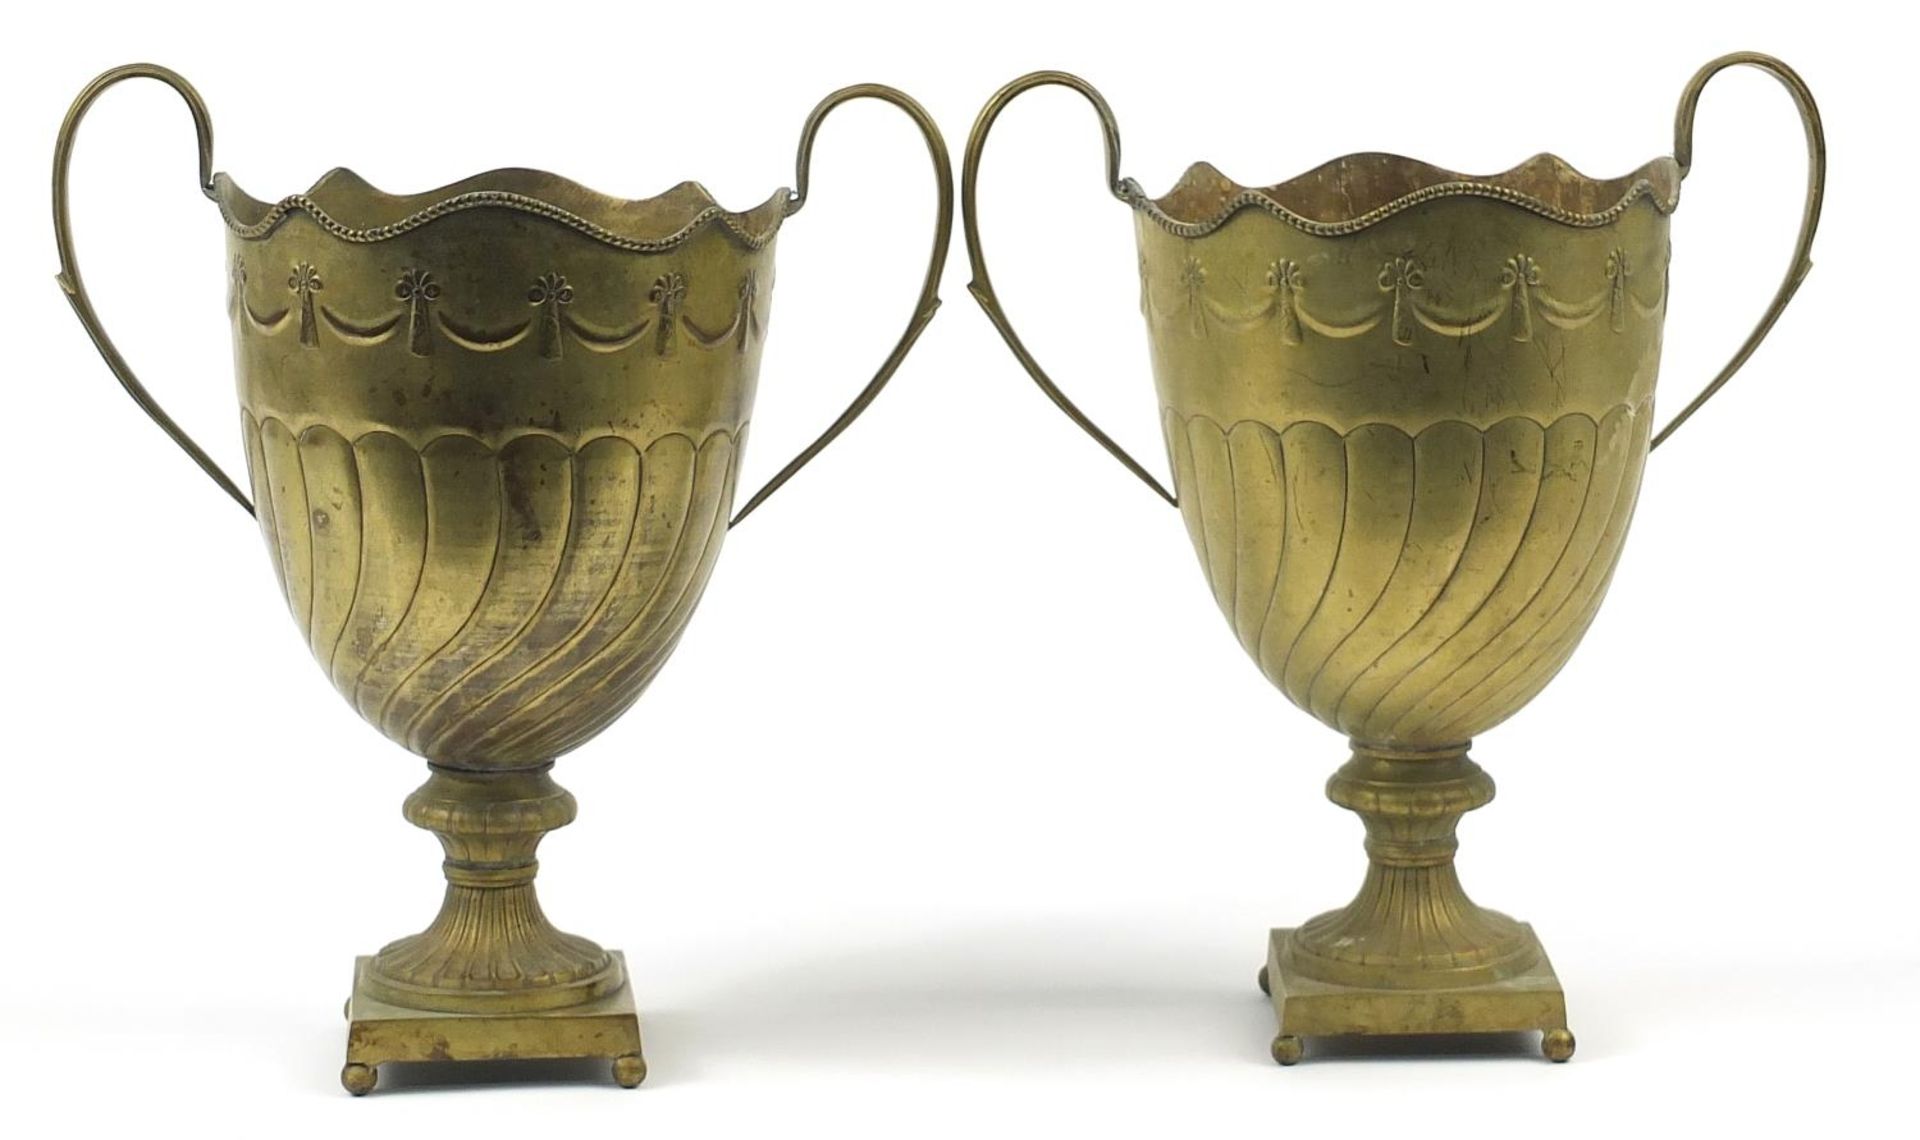 Pair of Antique bronzed urn design wine coolers with twin handles embossed with swags, 42cm high - Image 2 of 3